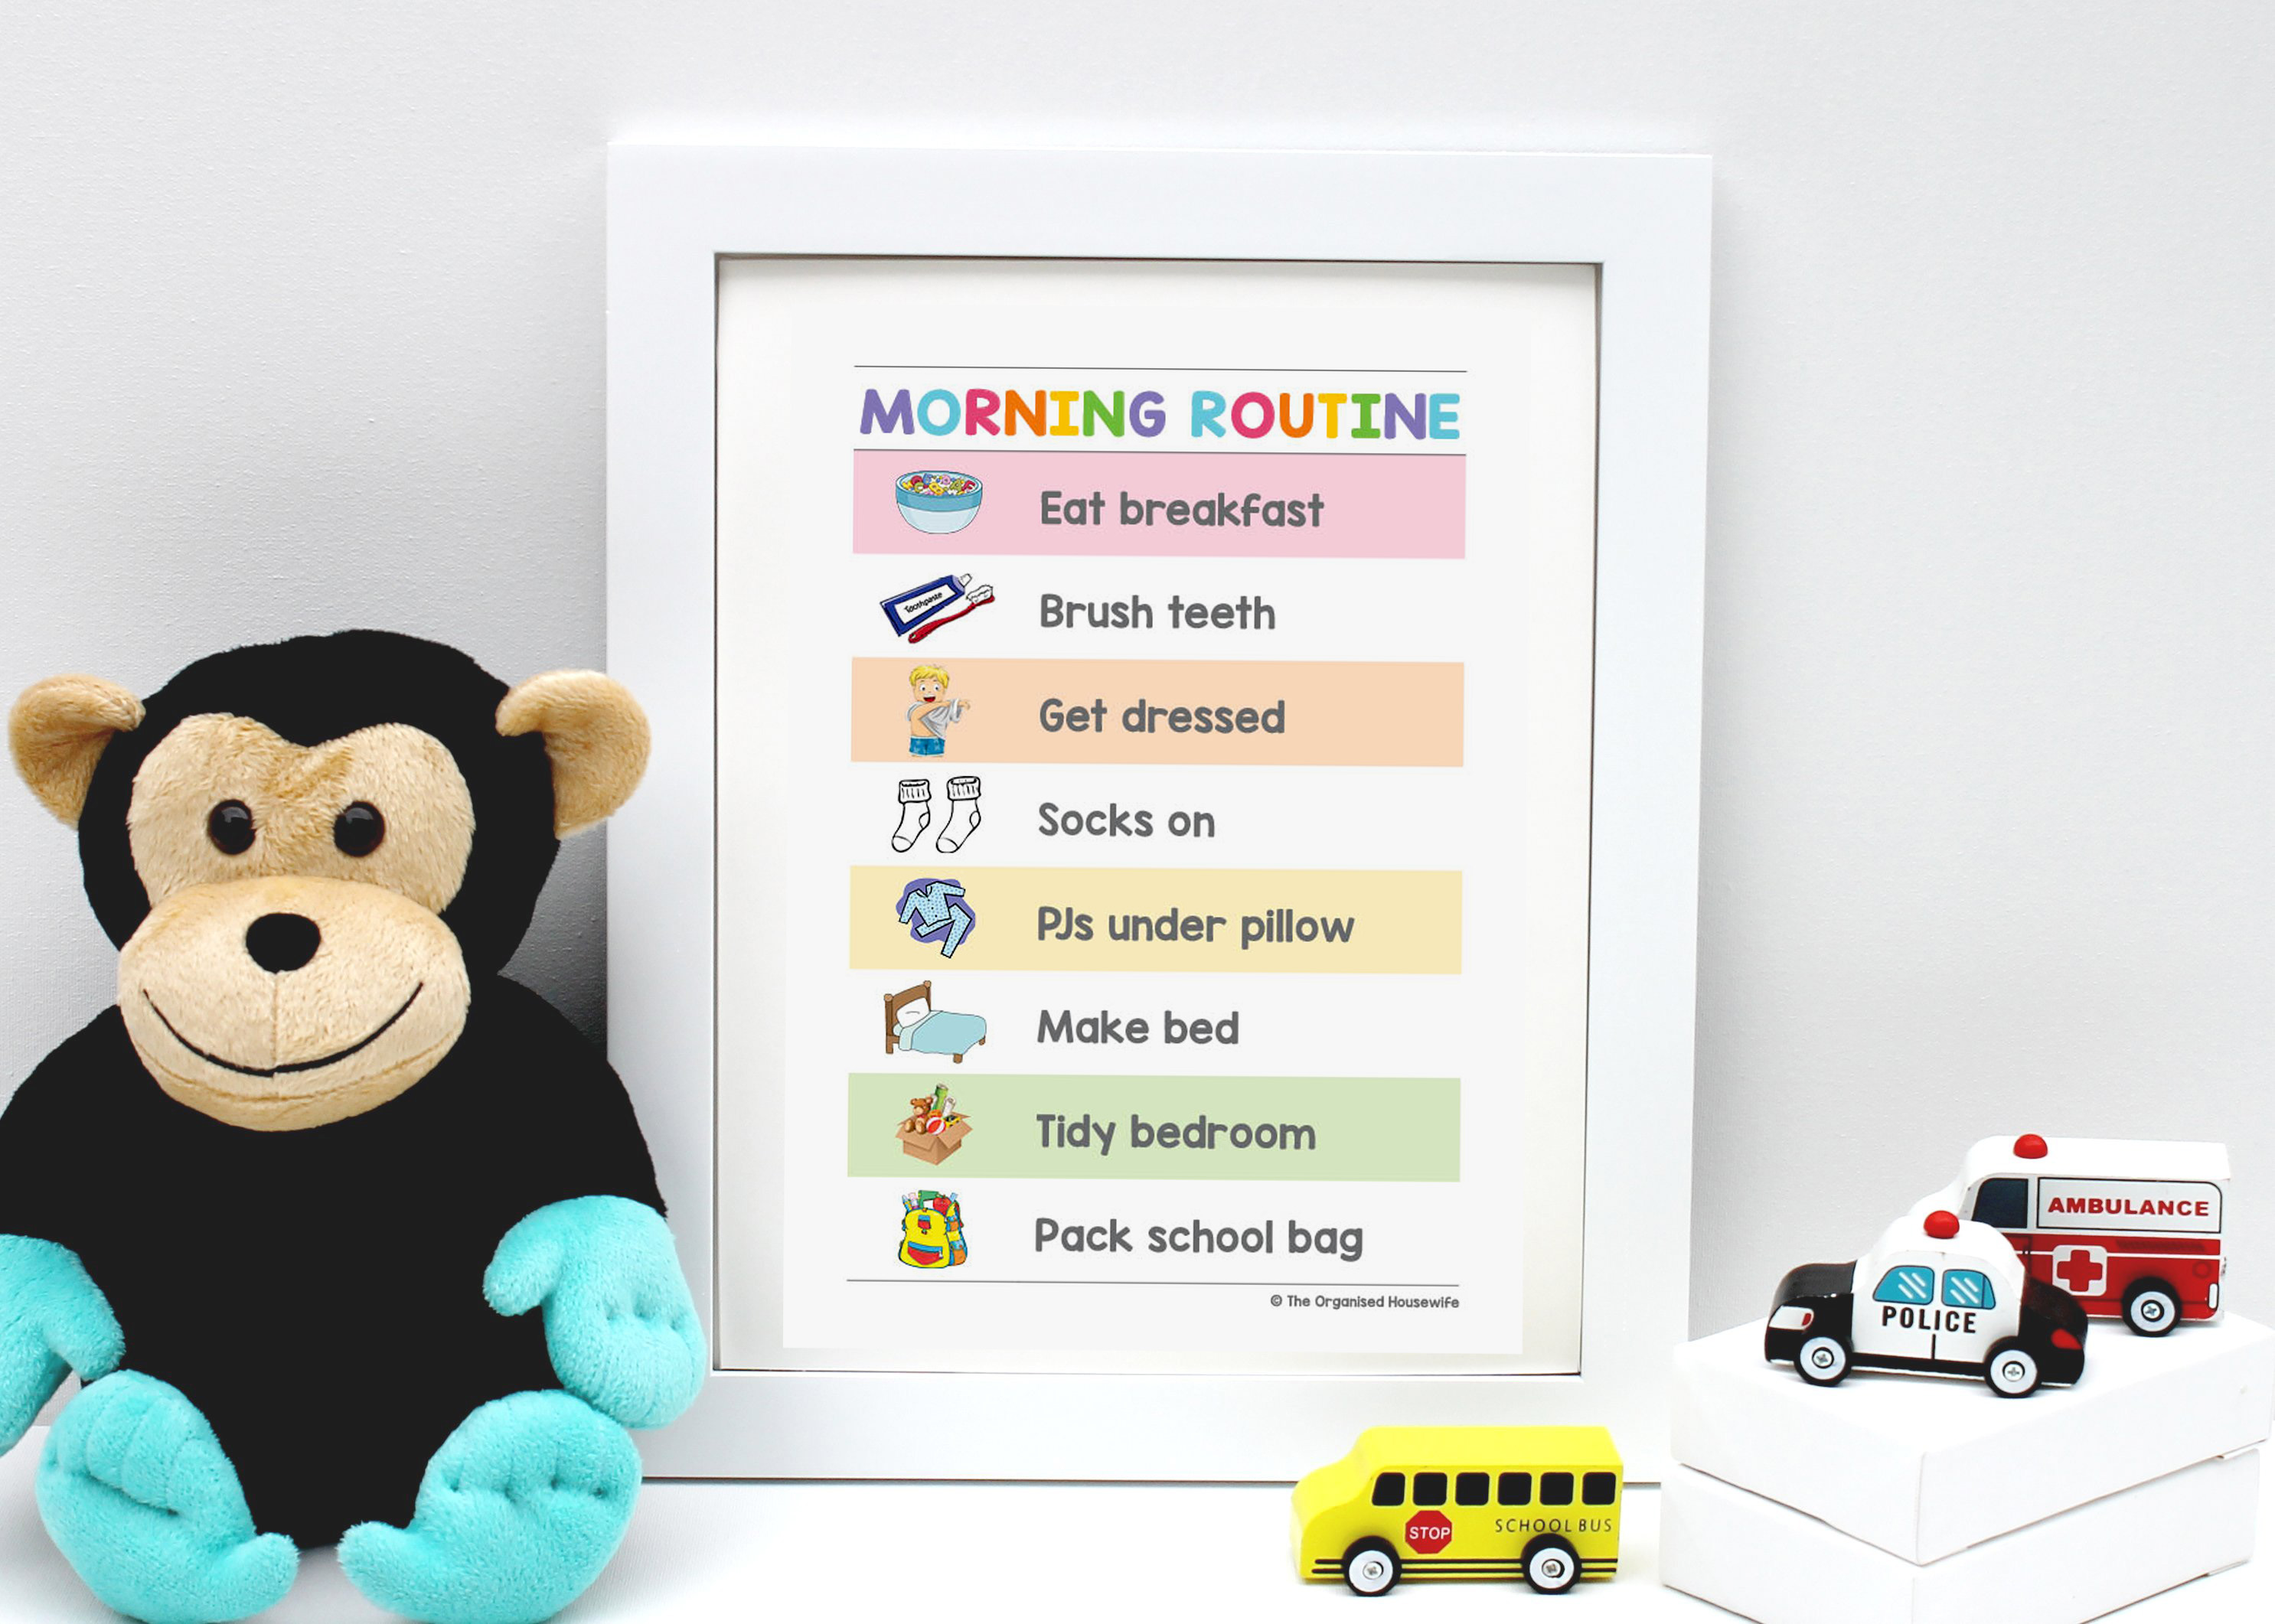 Help kids get organised on school mornings with morning routine chart